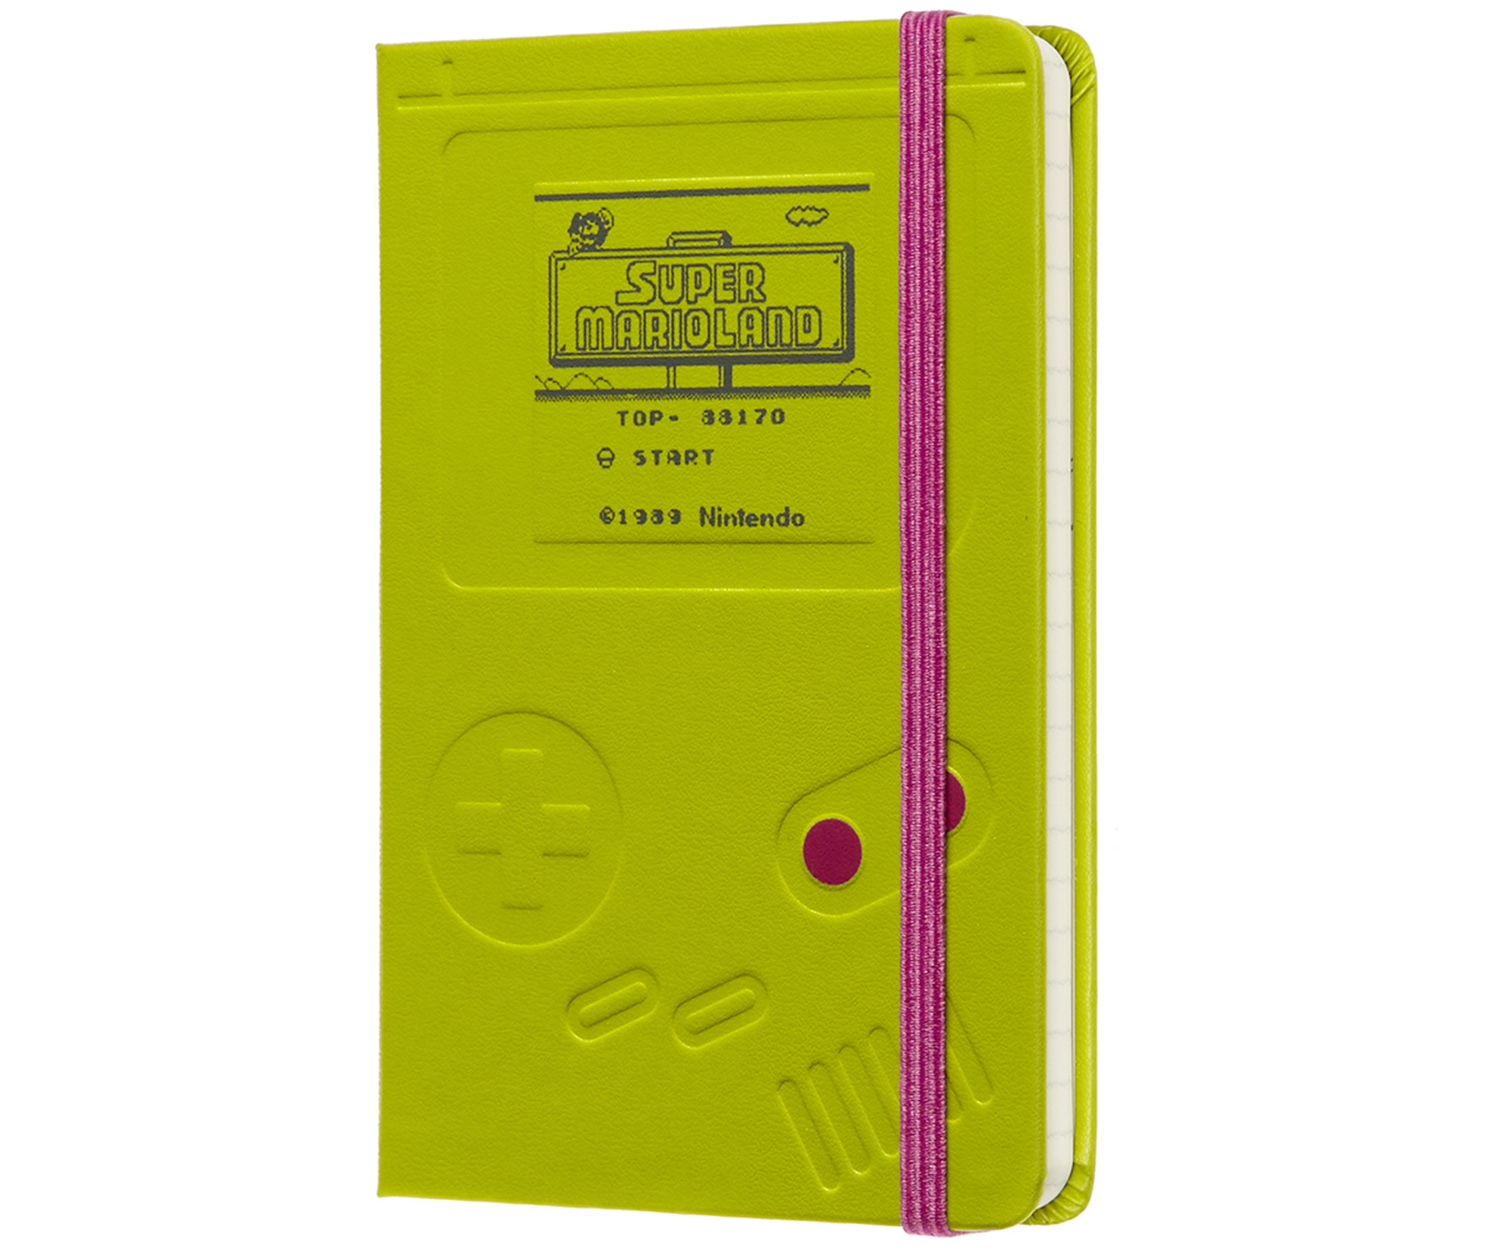 Now you’re journaling with power! (with this Mario-branded Moleskine gear)